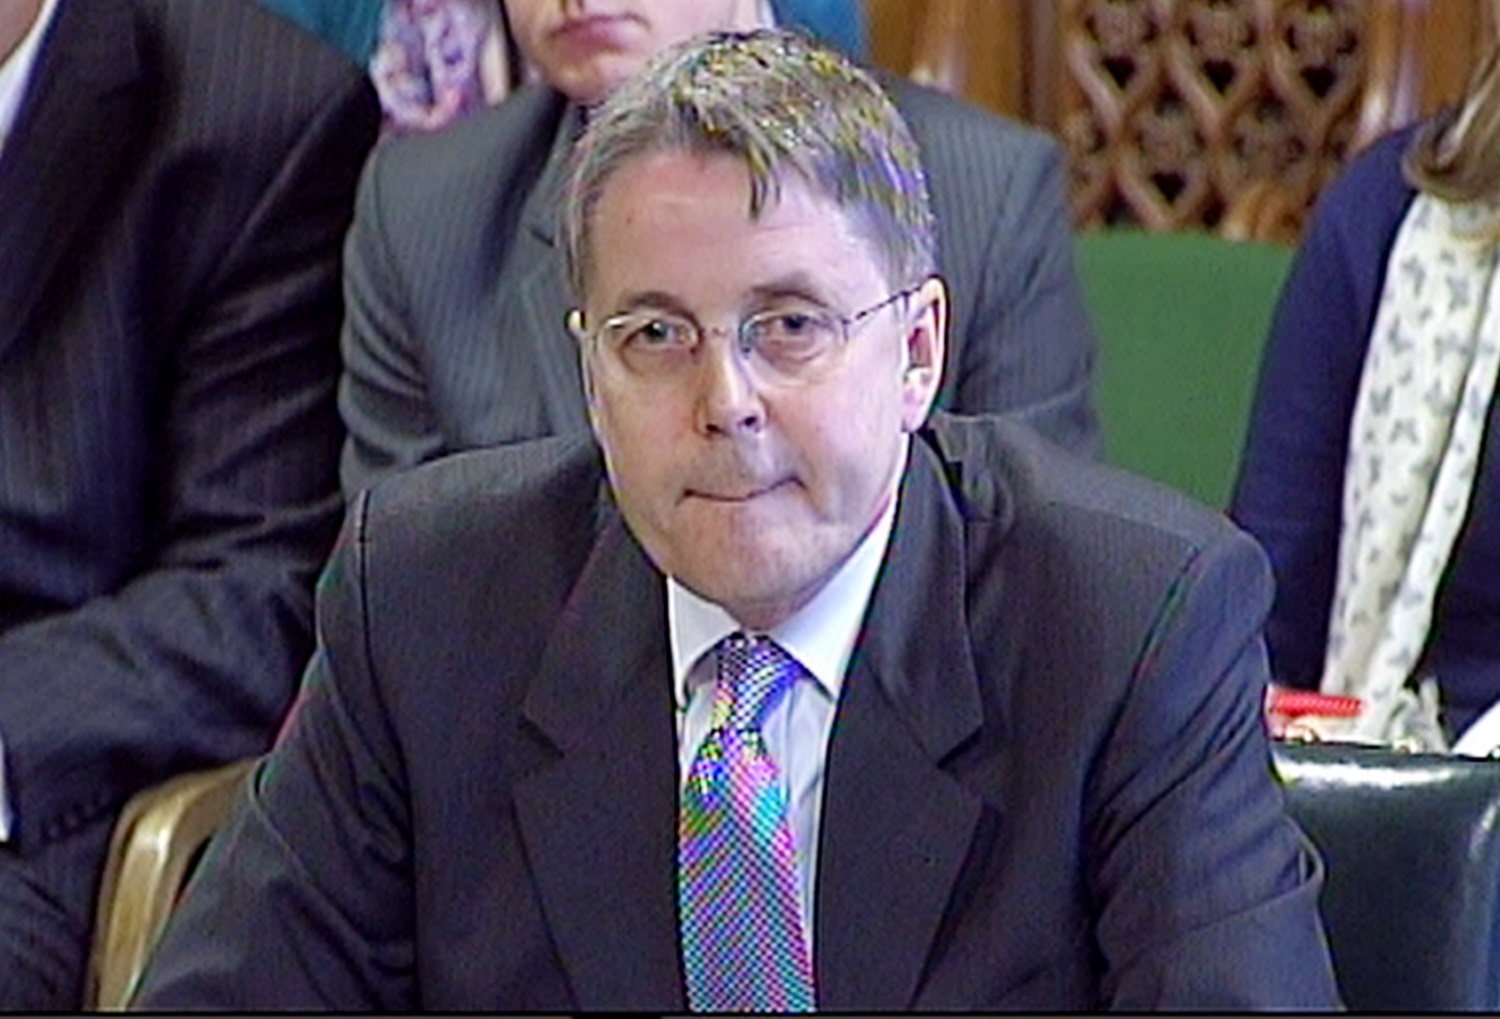 Sir Jeremy Heywood conducting review to ensure HS2 stays within budget